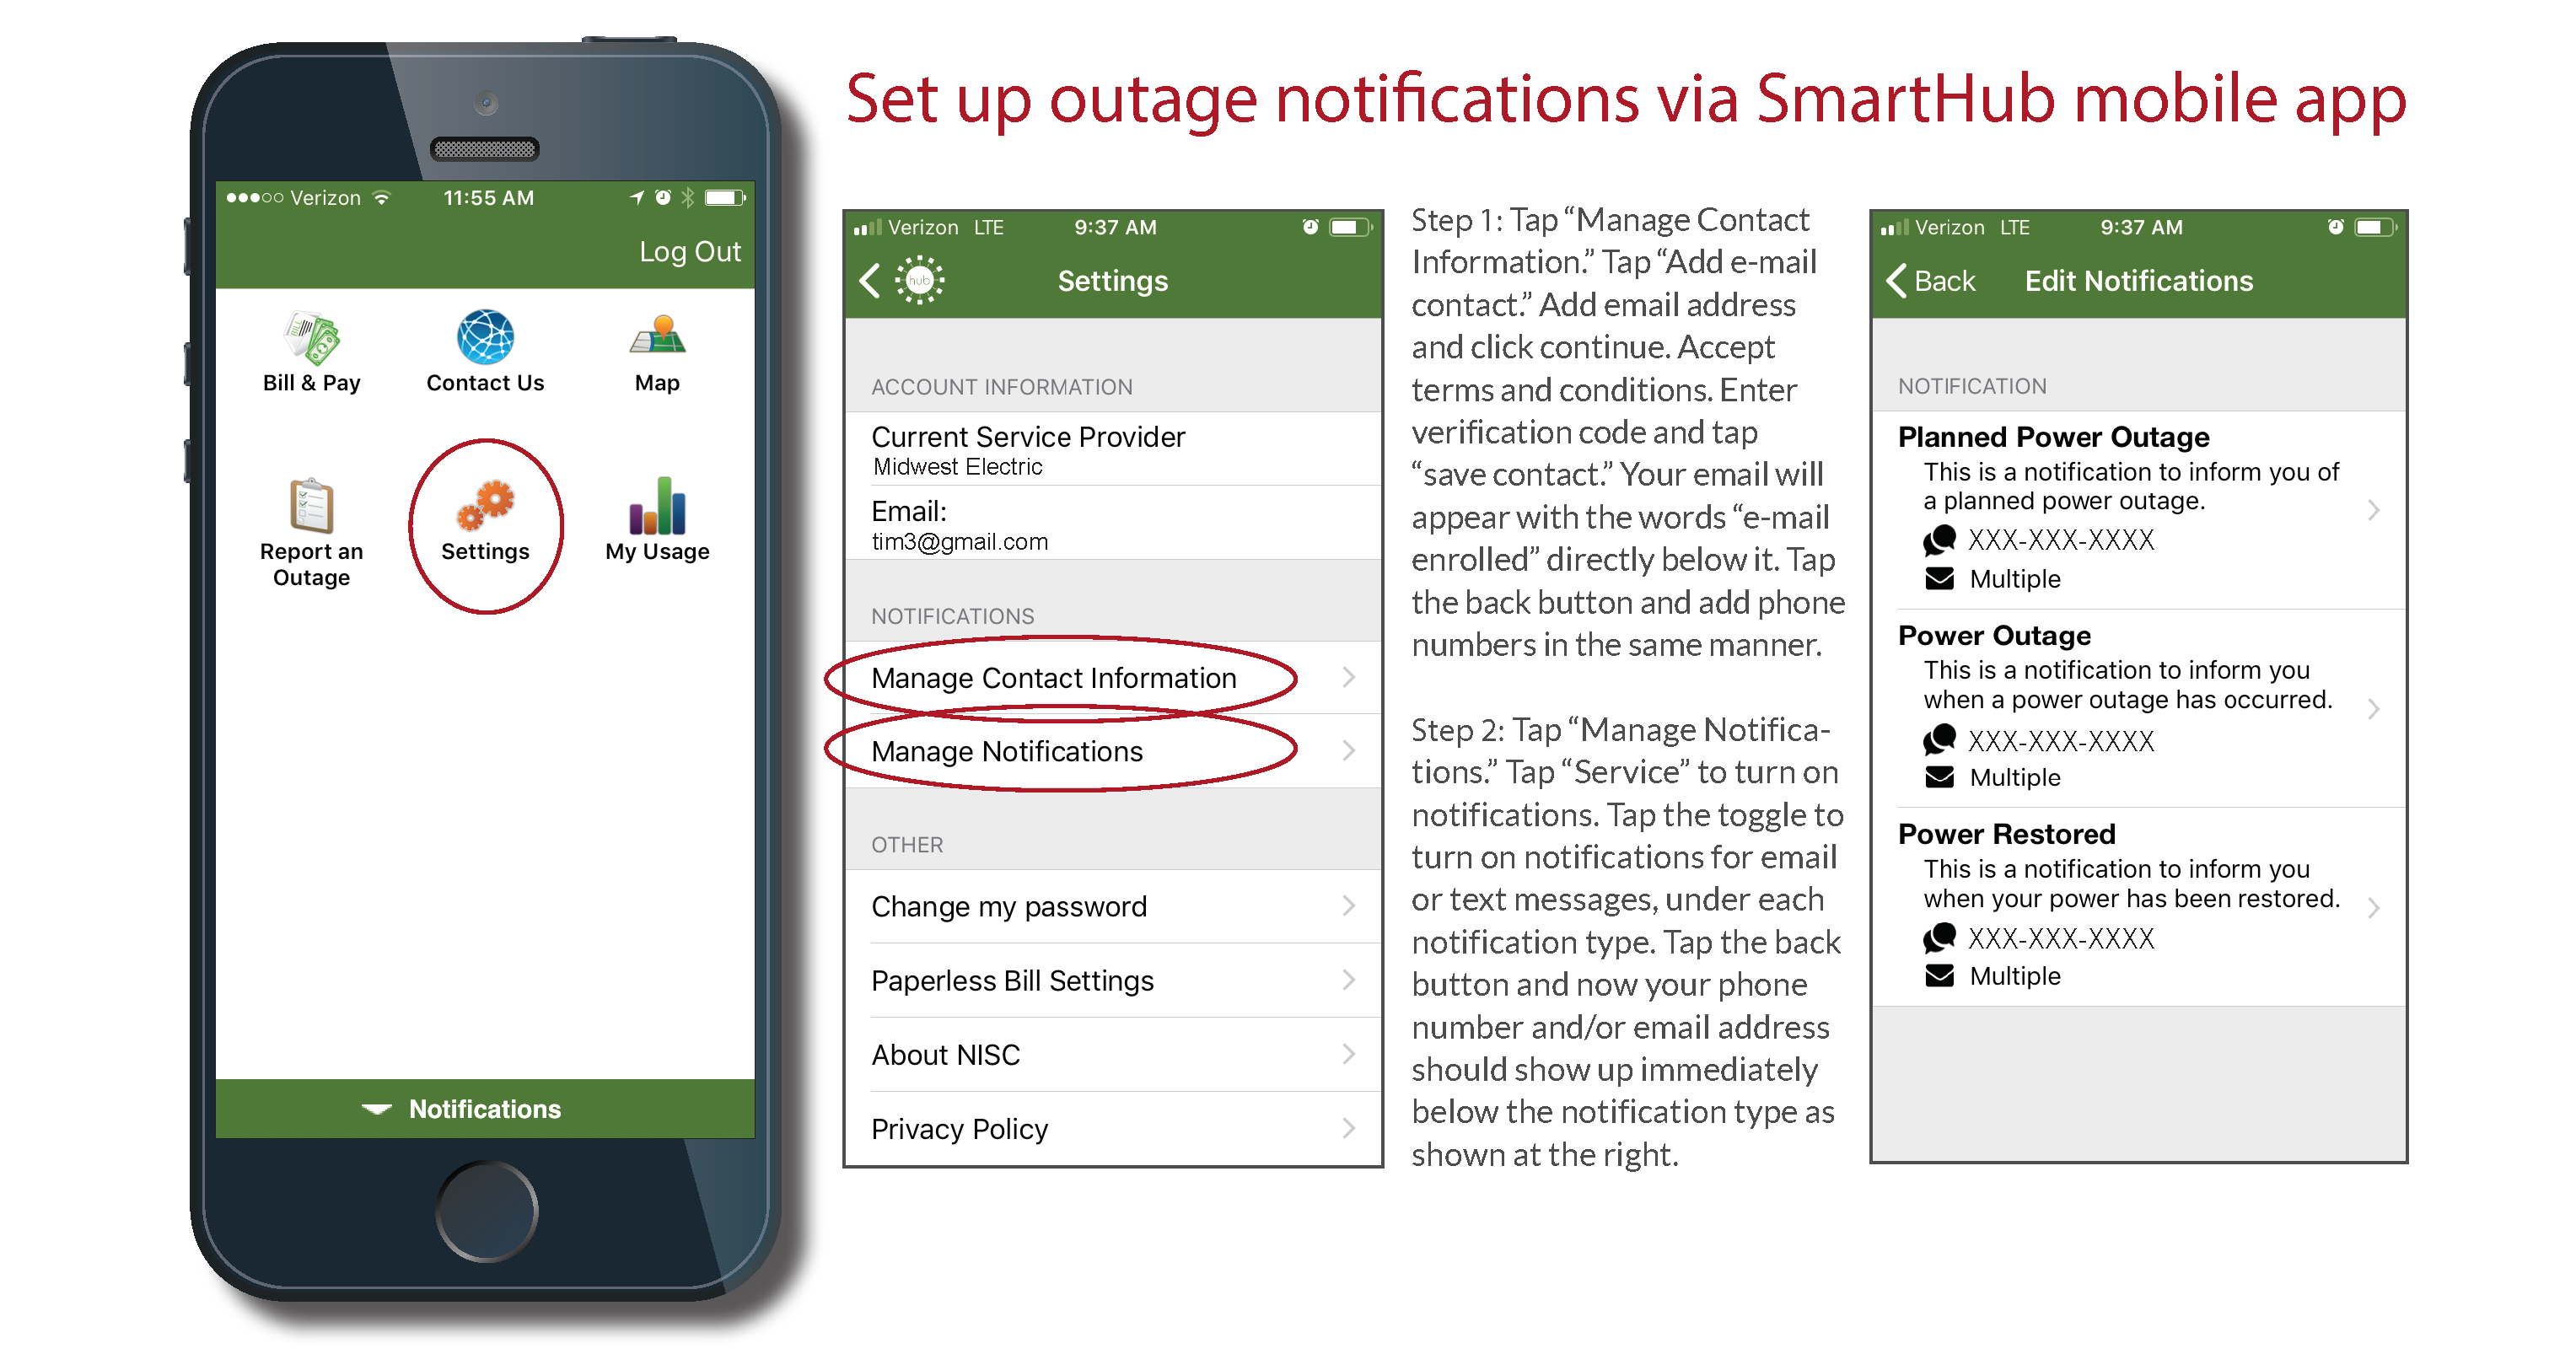 How to sign up for outage notifications using your Smartphone app